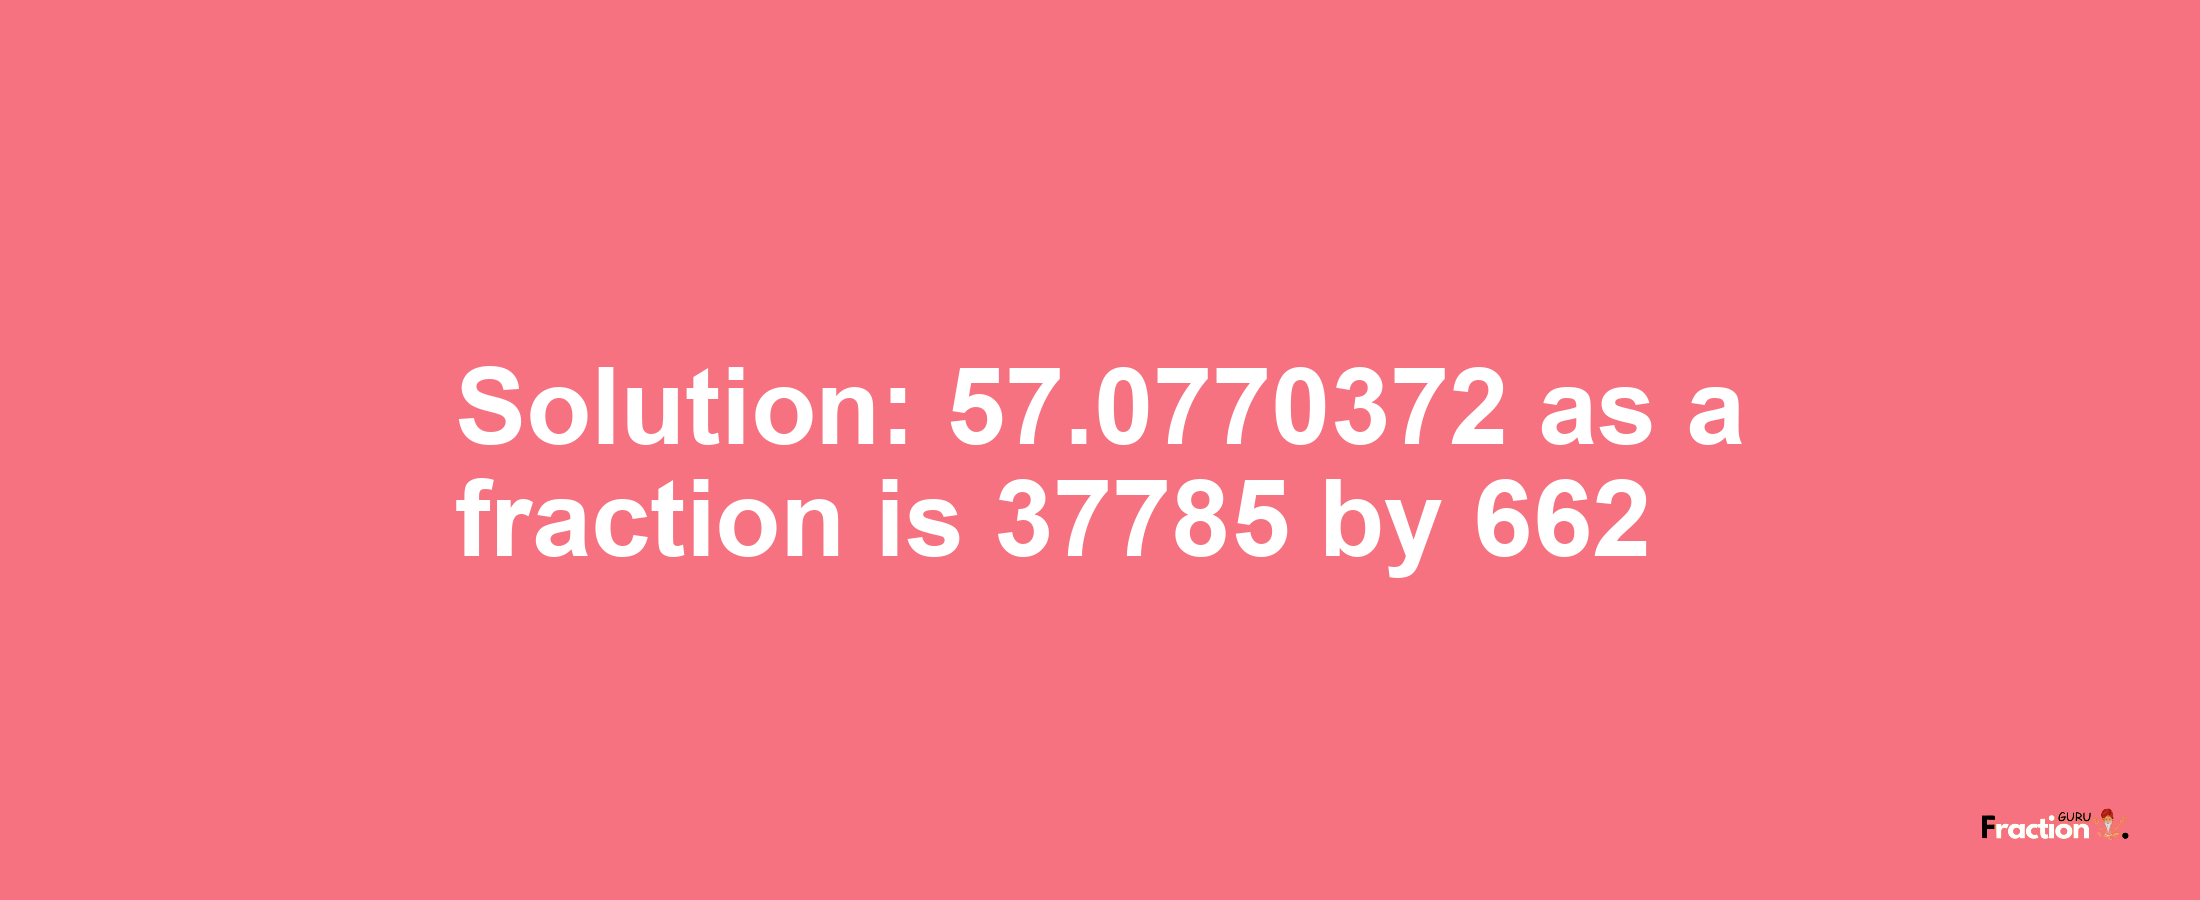 Solution:57.0770372 as a fraction is 37785/662